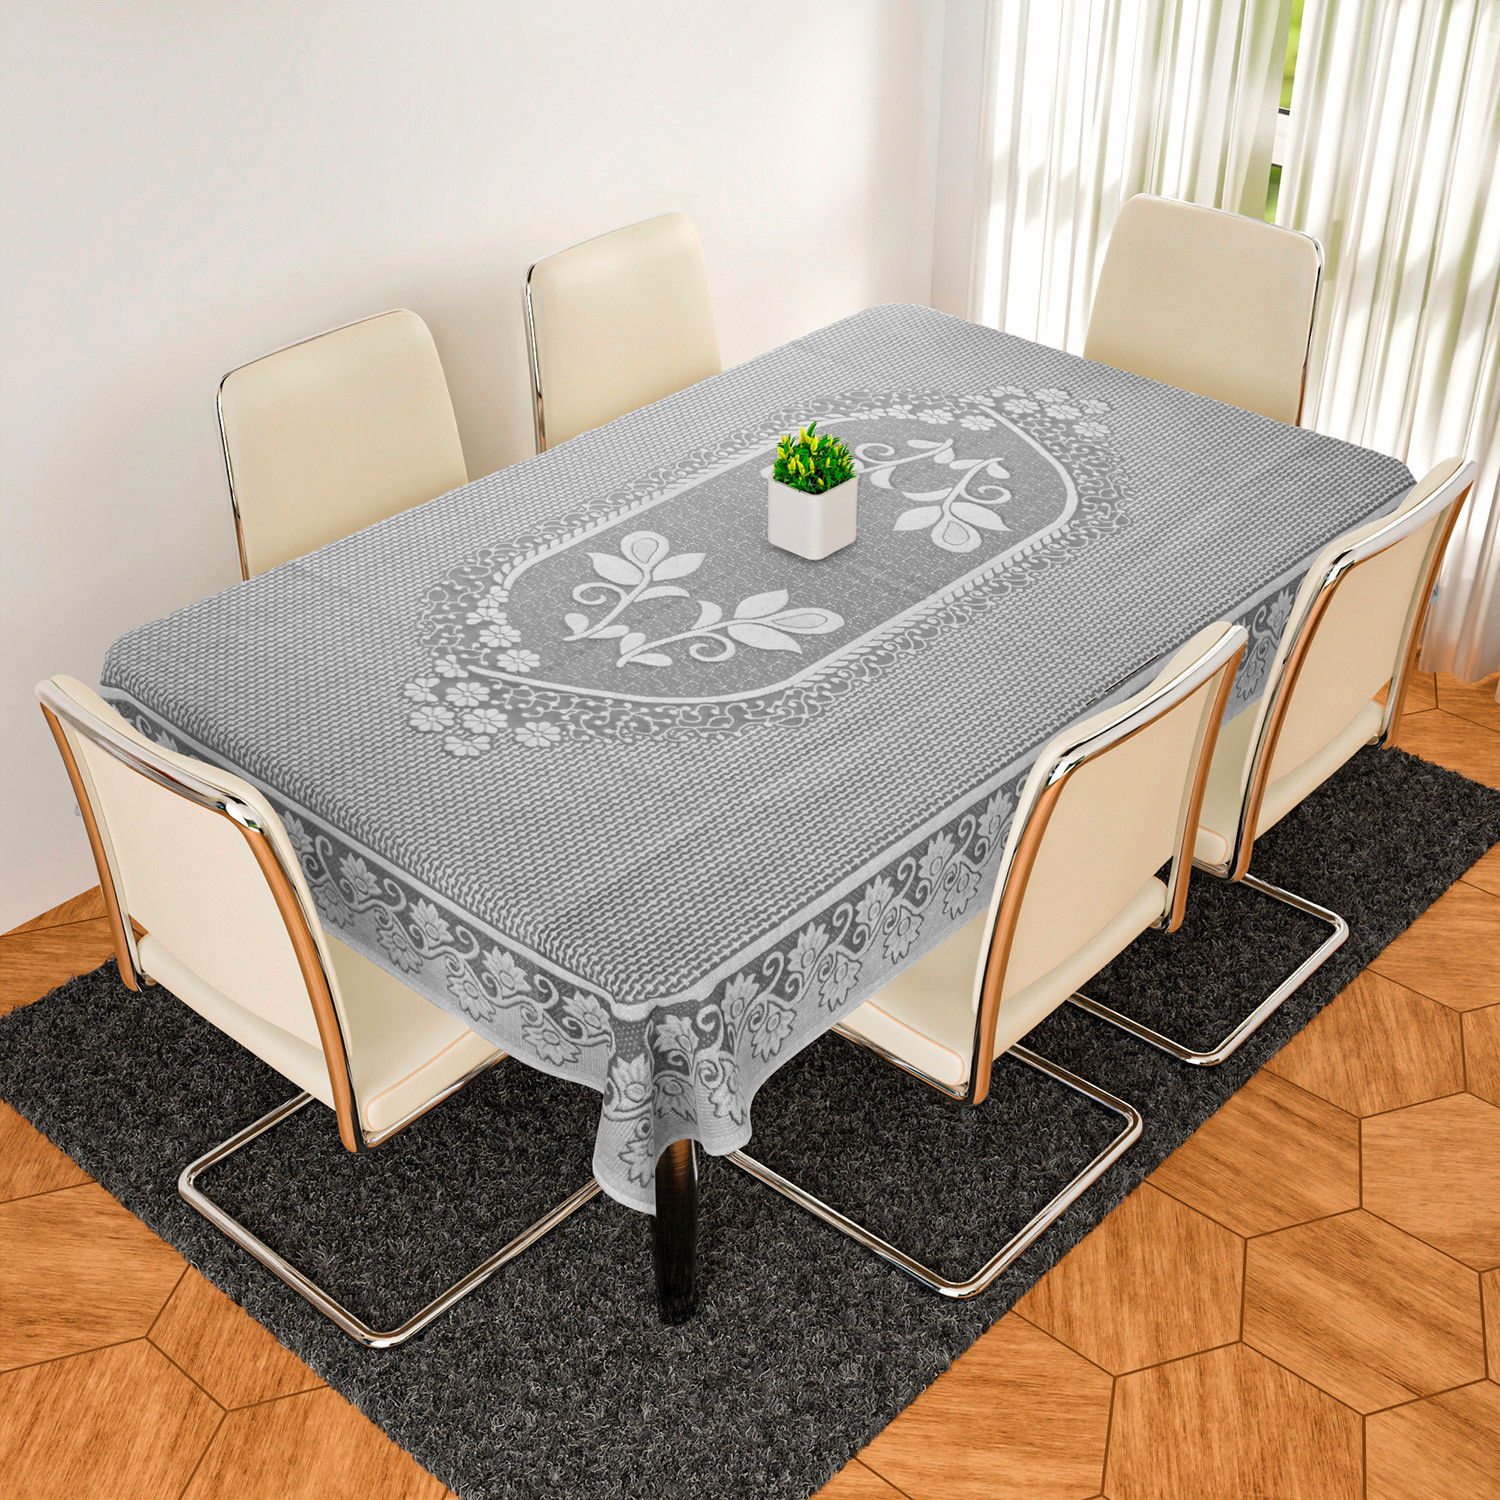 Kuber Industries Dining Table Cover|Luxurious Net Floral S-19 Design|Cotton Anti Skid & Waterproof Tablecloth for Home Decoration|60X90 Inch (White)